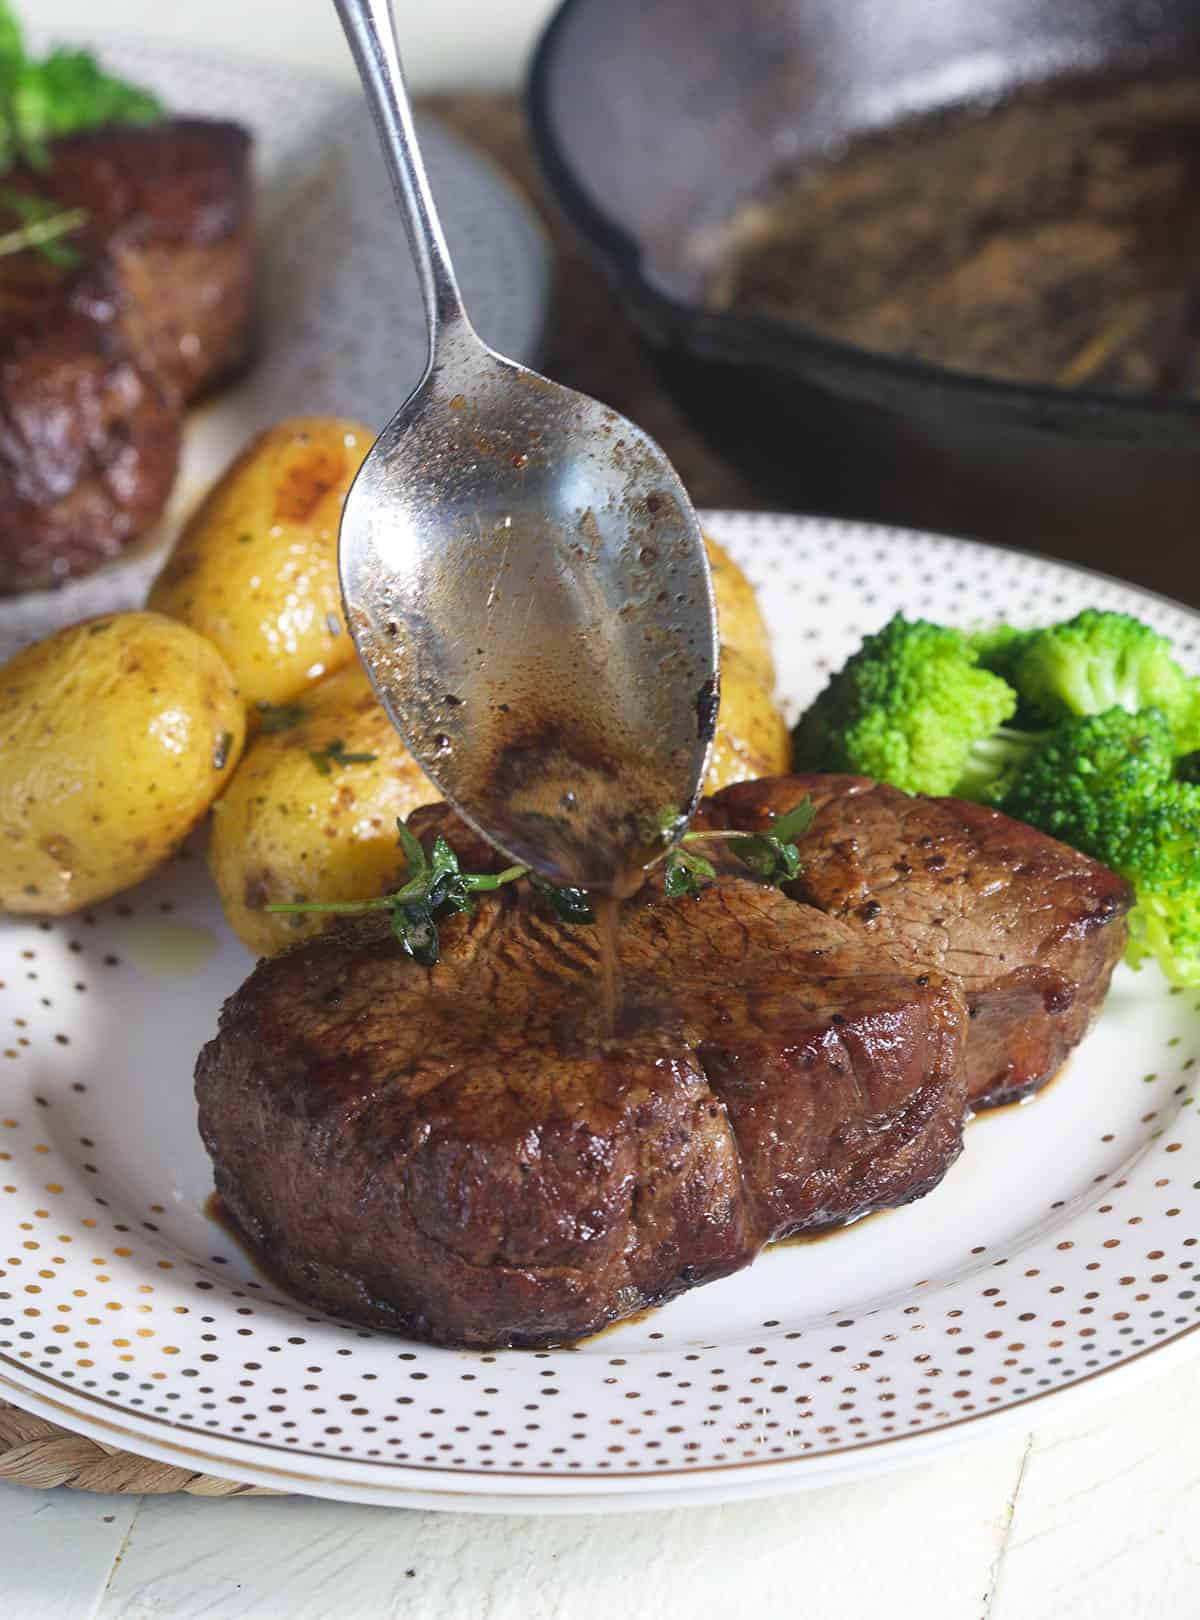 A spoon is adding more pan juices to the top of a cooked steak.